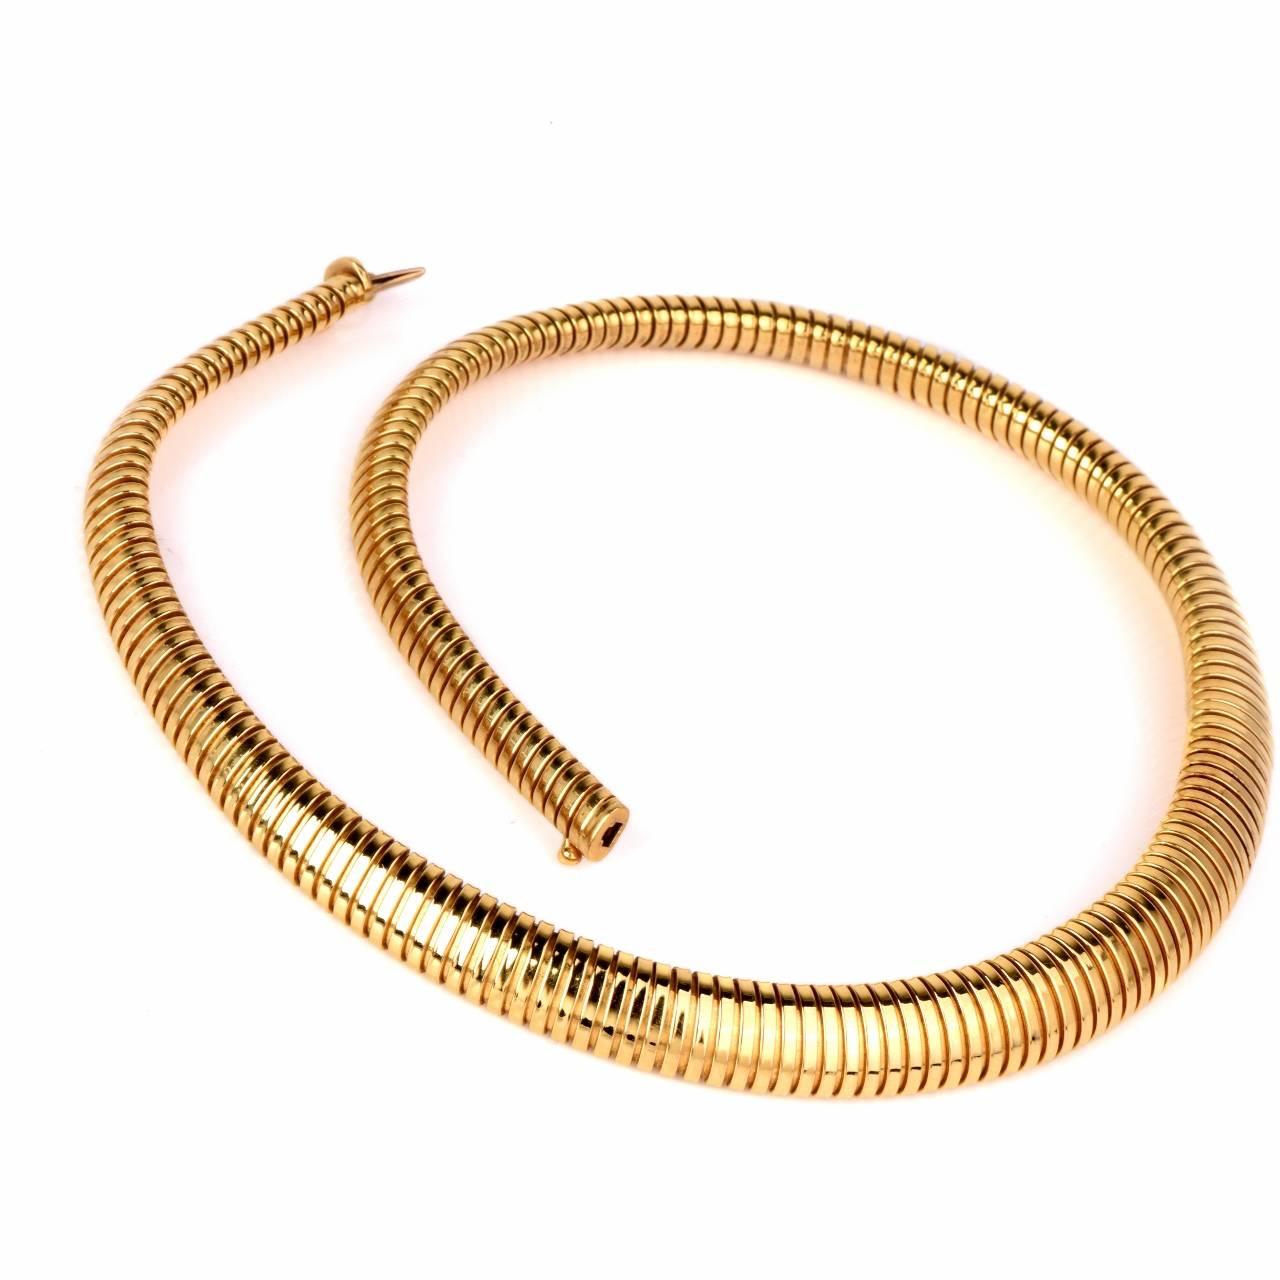 This  classically distinct, yellow gold necklace of 'snake design'  is crafted in solid 18K yellow gold, immaculately textured as a finely ridged pattern to simulate the anatomically accurate skin of a serpent. This style was produced during